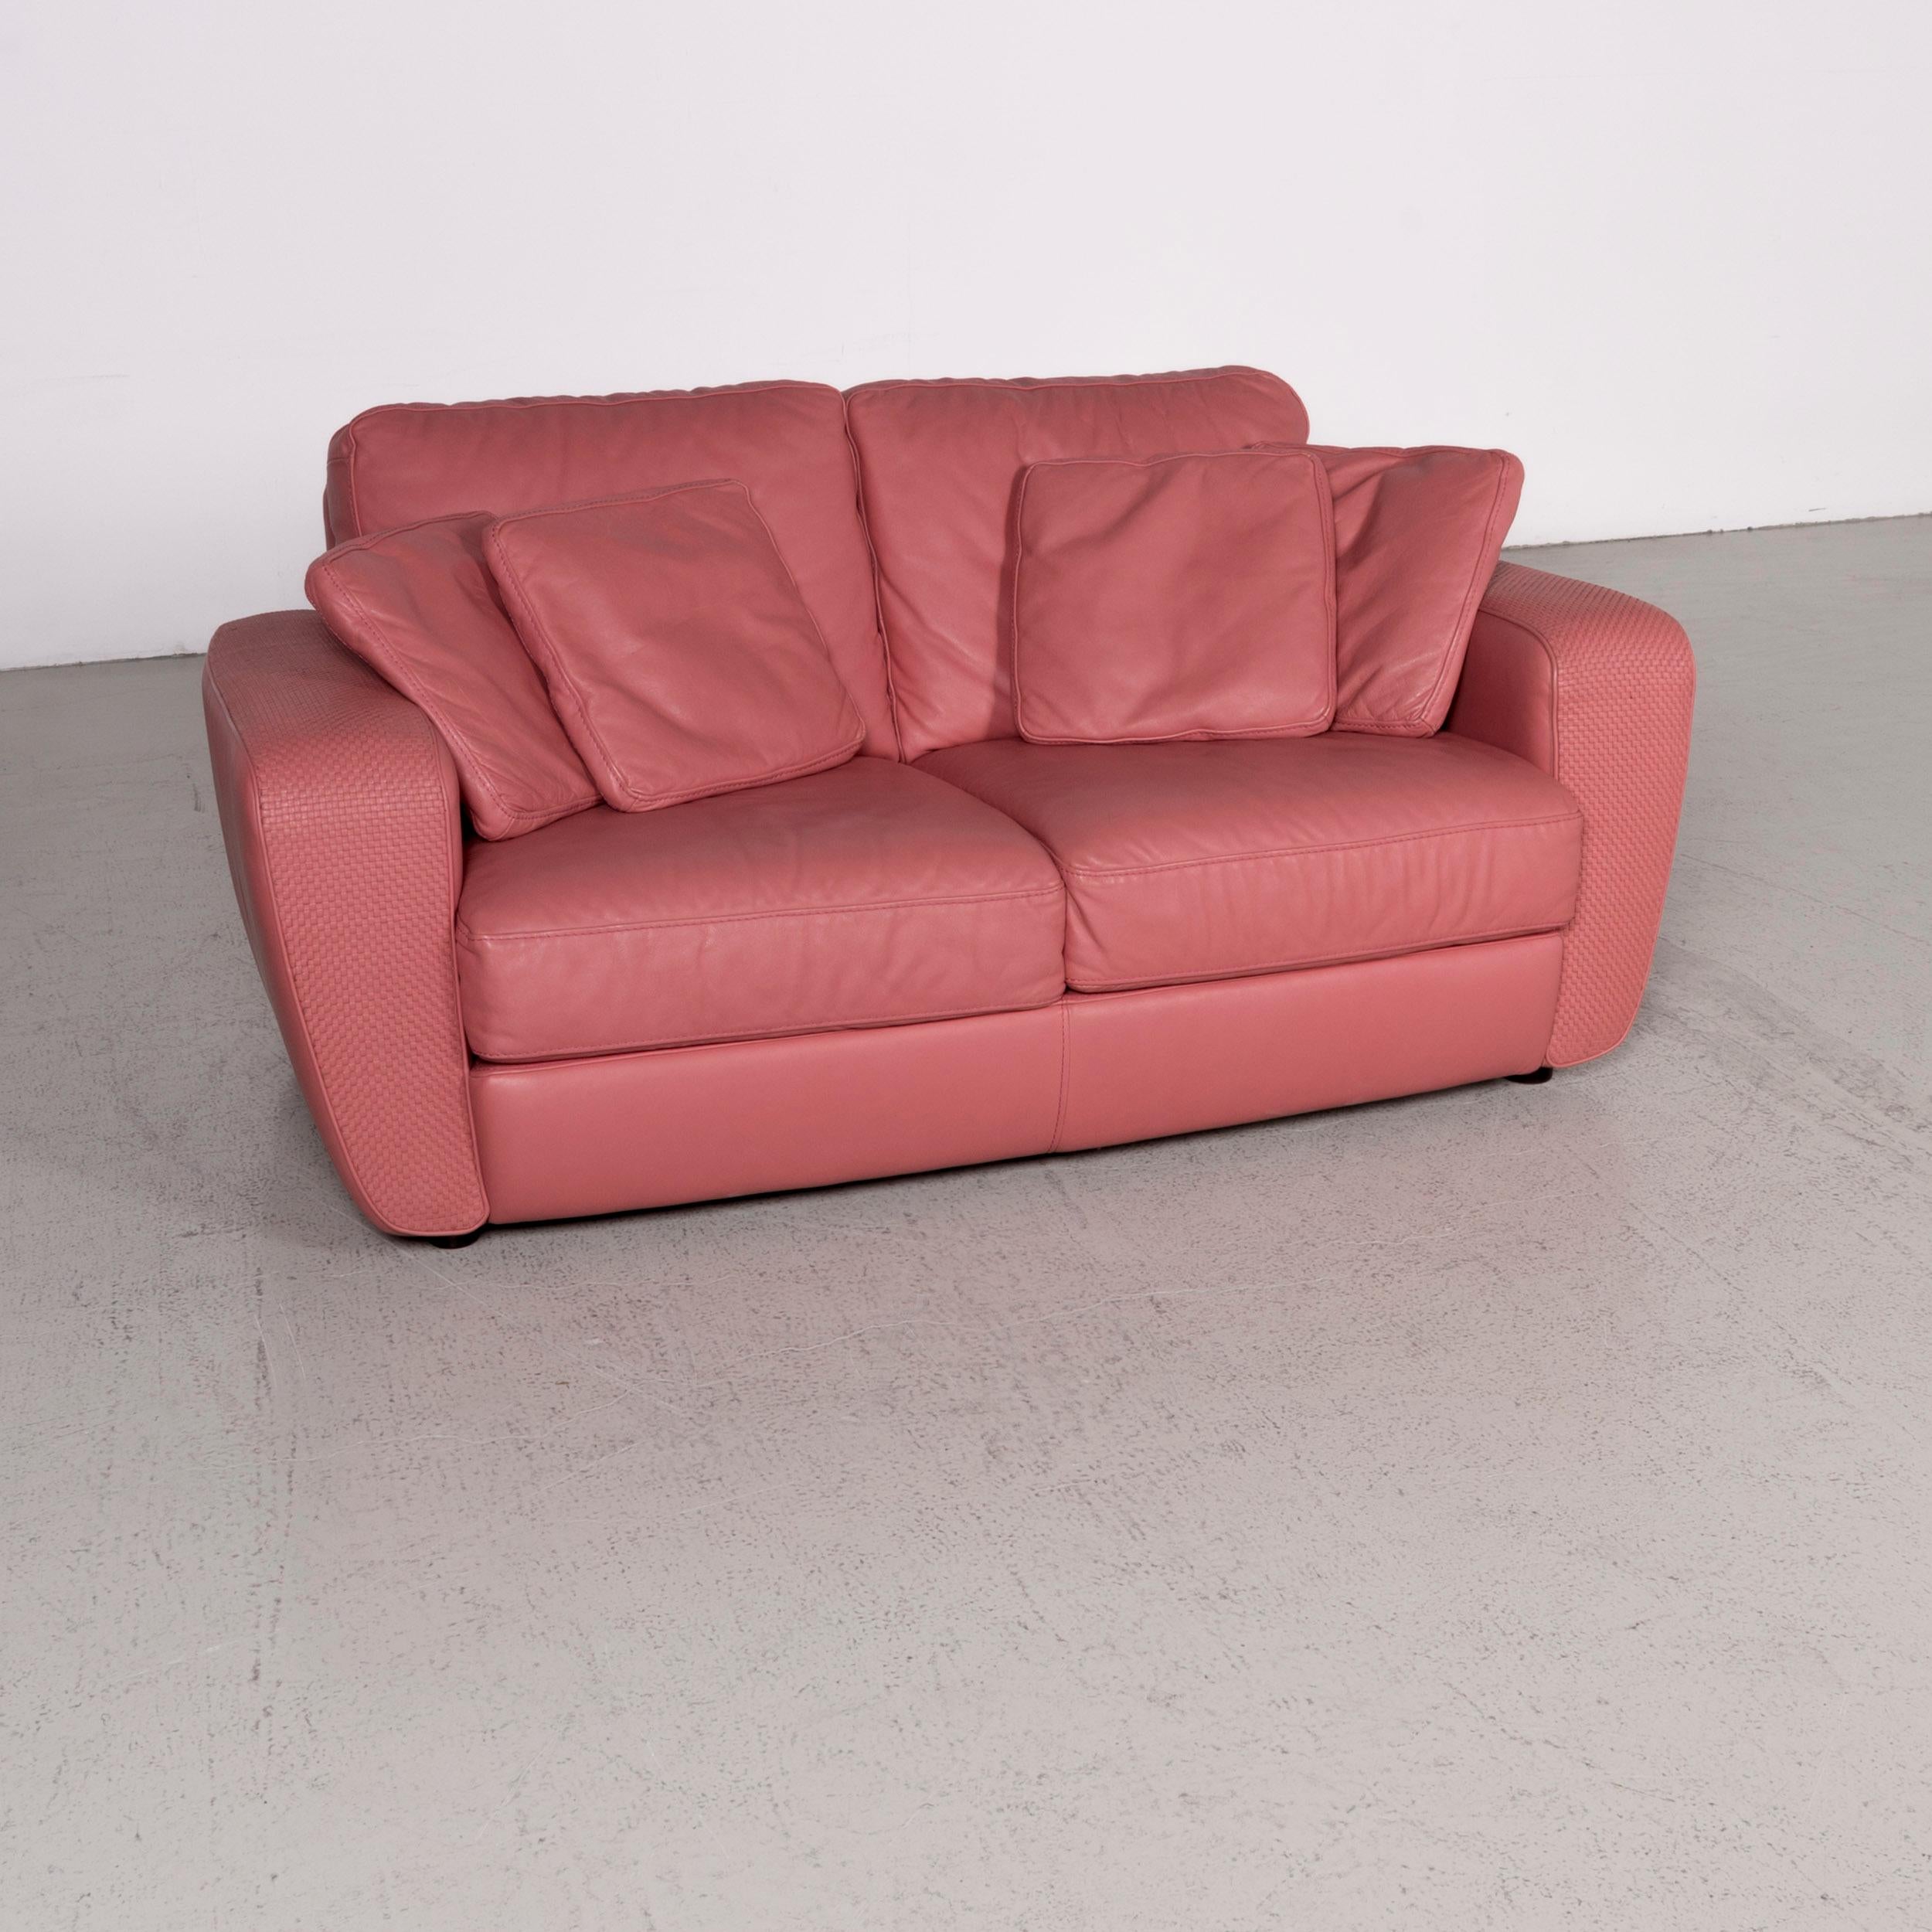 We bring to you a Natuzzi designer leather sofa red pink real leather two-seat couch.

Product measurements in centimeters:

Depth 95
Width 165
Height 80
Seat-height 40
Rest-height 55
Seat-depth 50
Seat-width 120
Back-height 50.
 